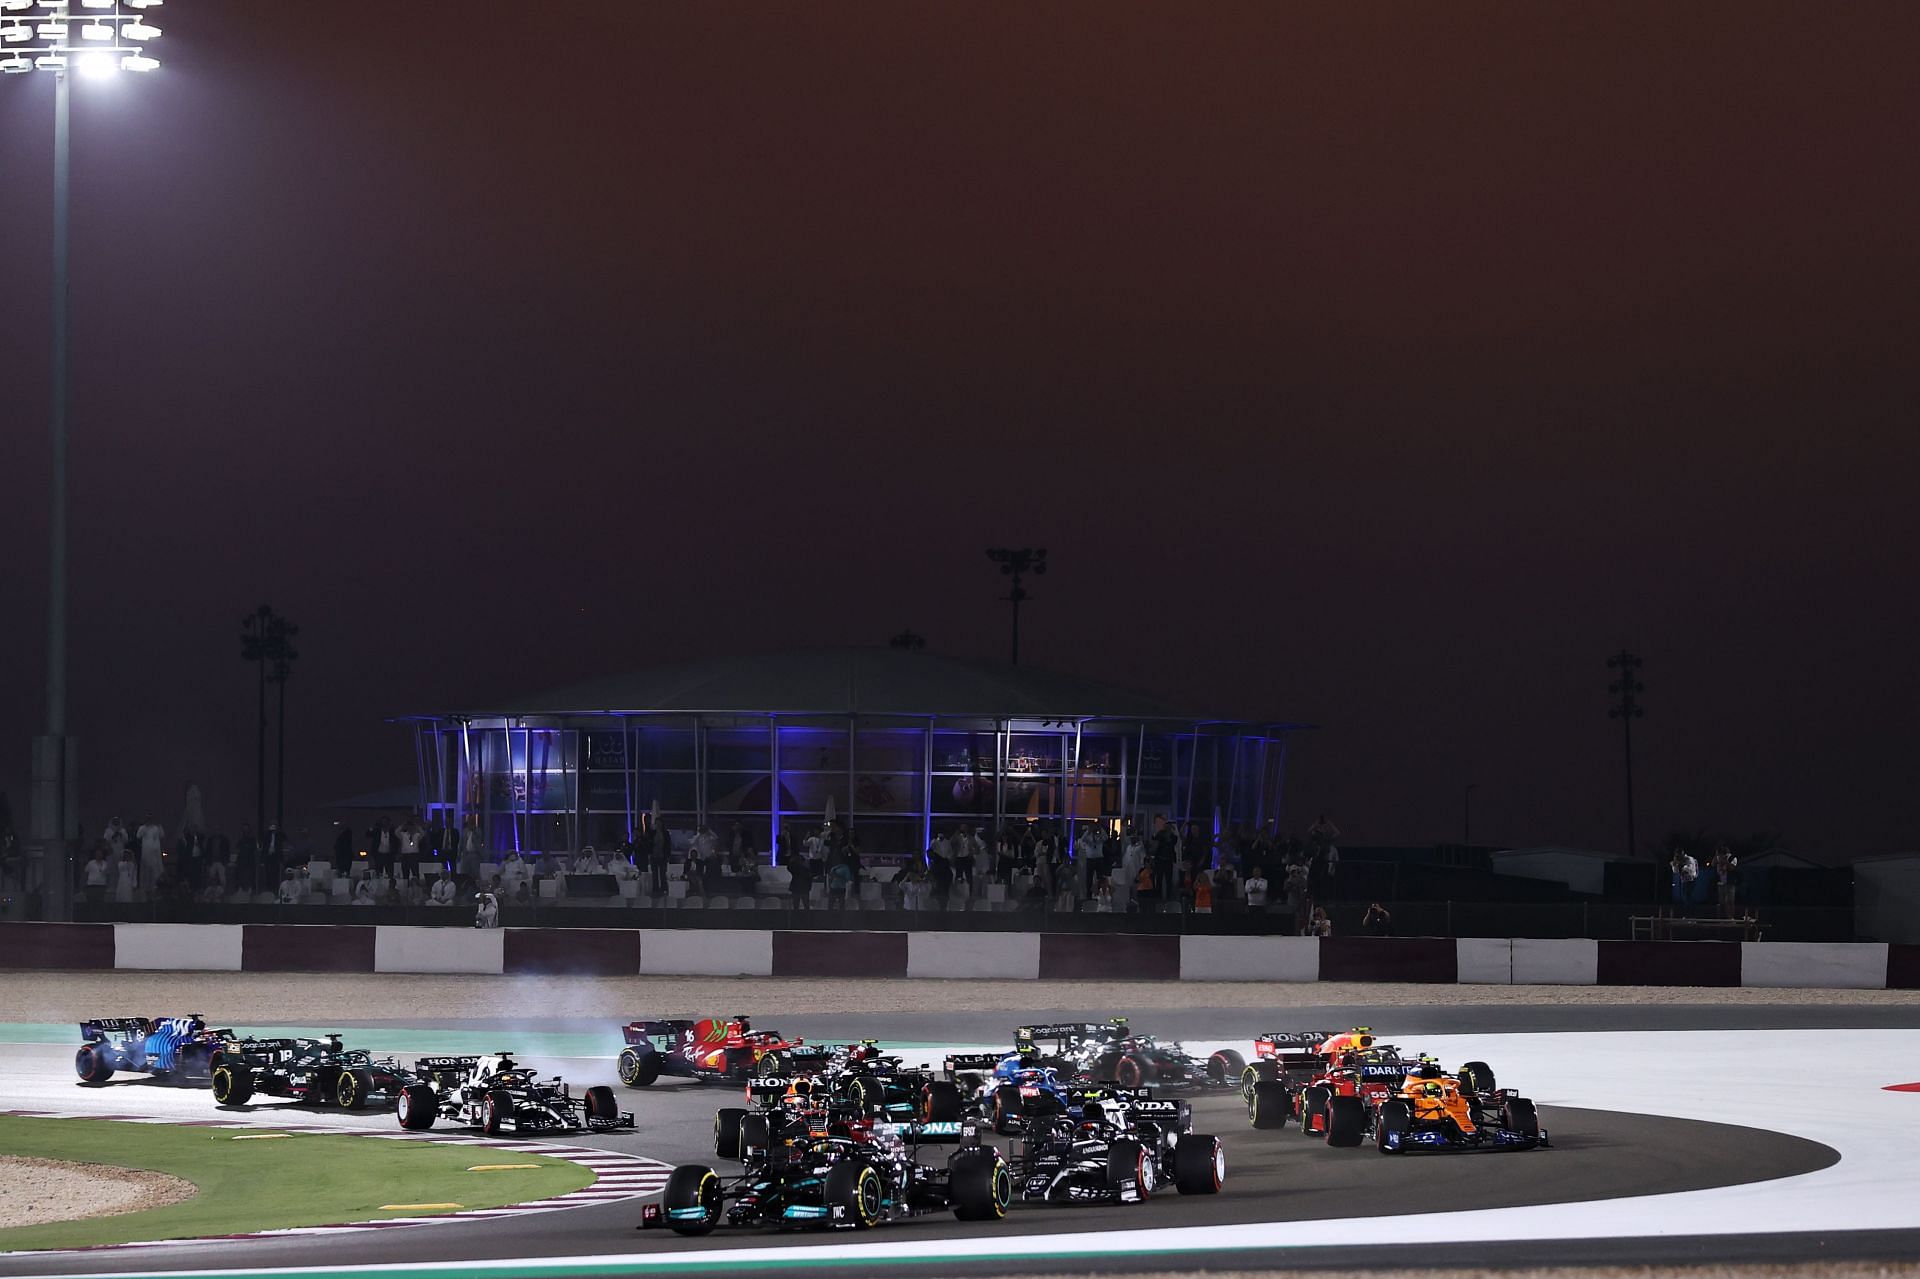 Lewis Hamilton leads the field at the start of the 2021 Qatar Grandd Prix at the Losail International circuit.